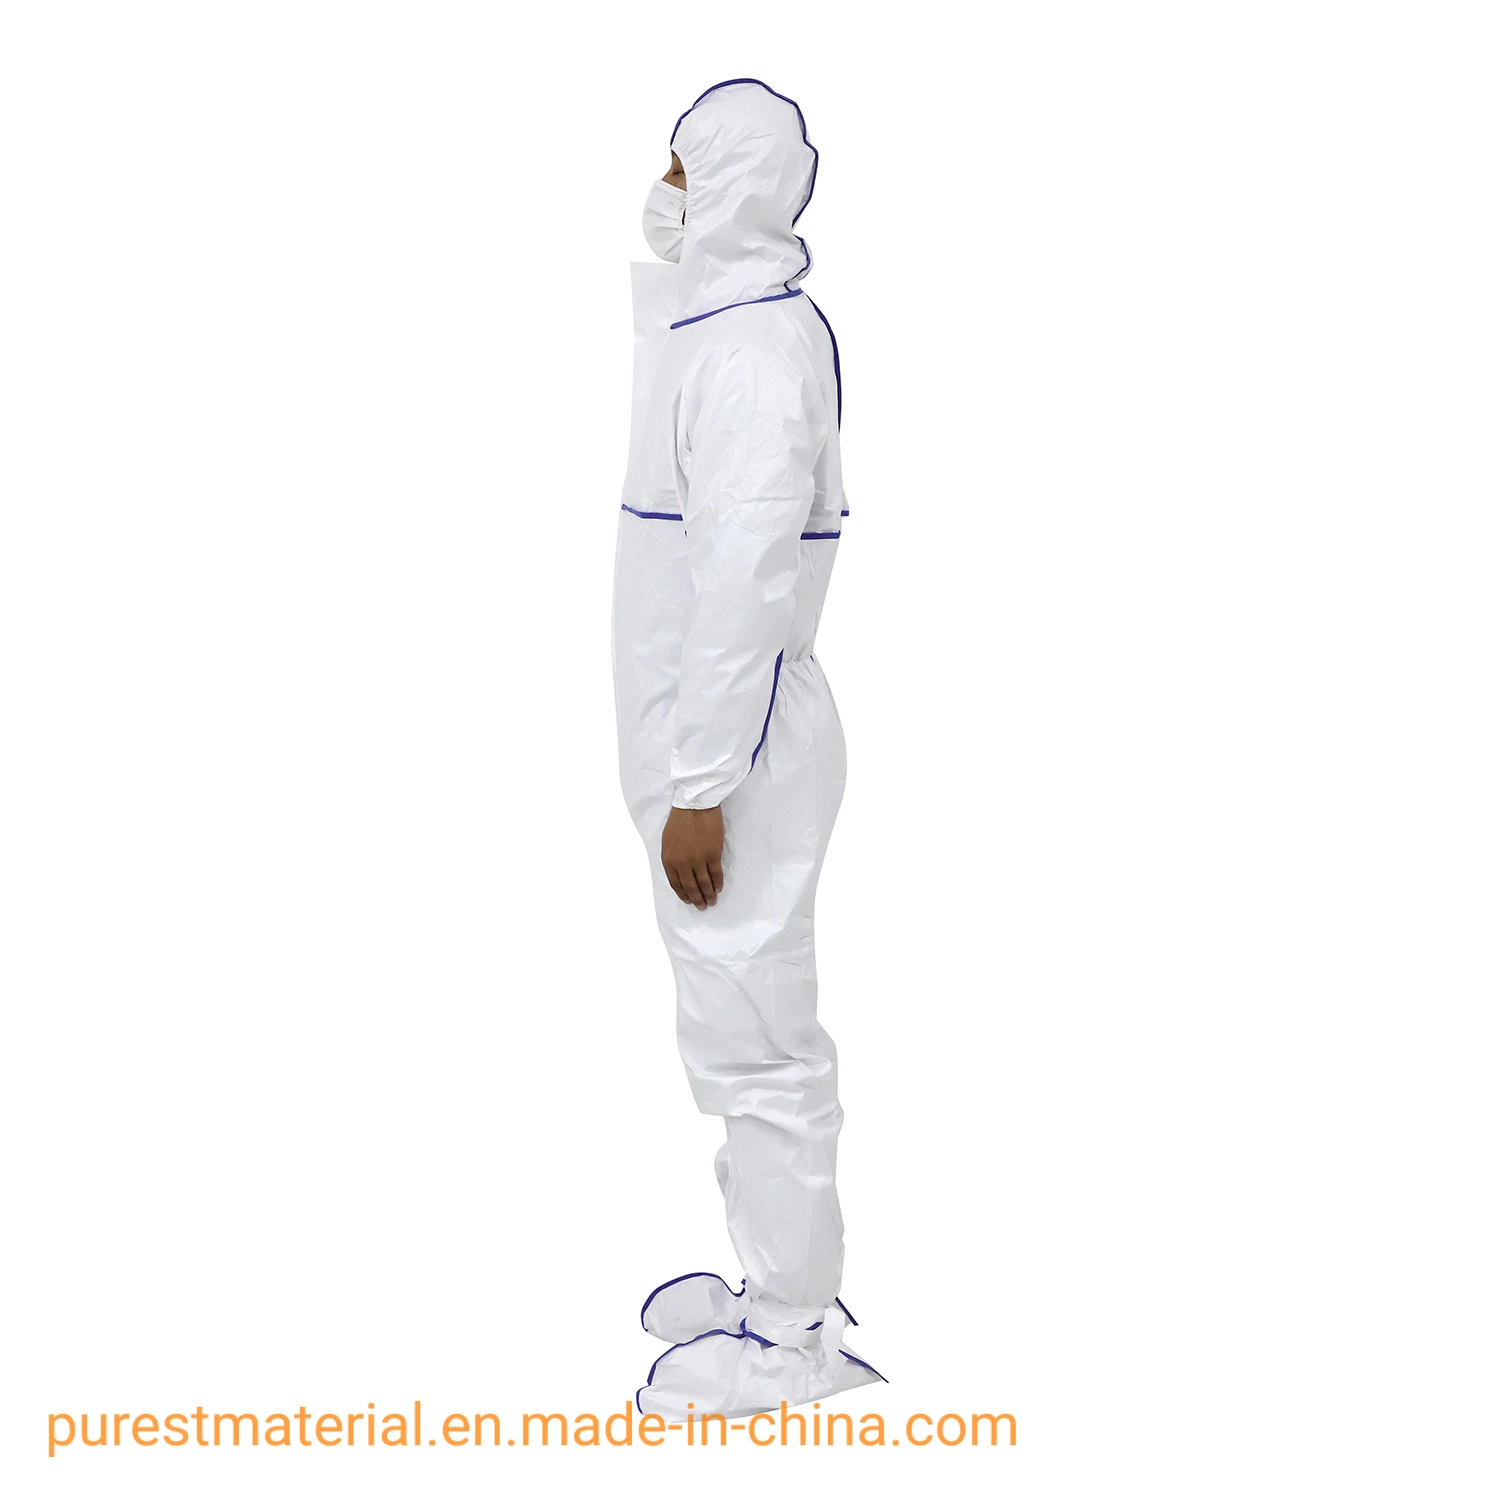 High-Protective Clothing Protective Isolation Gowns for Hospital